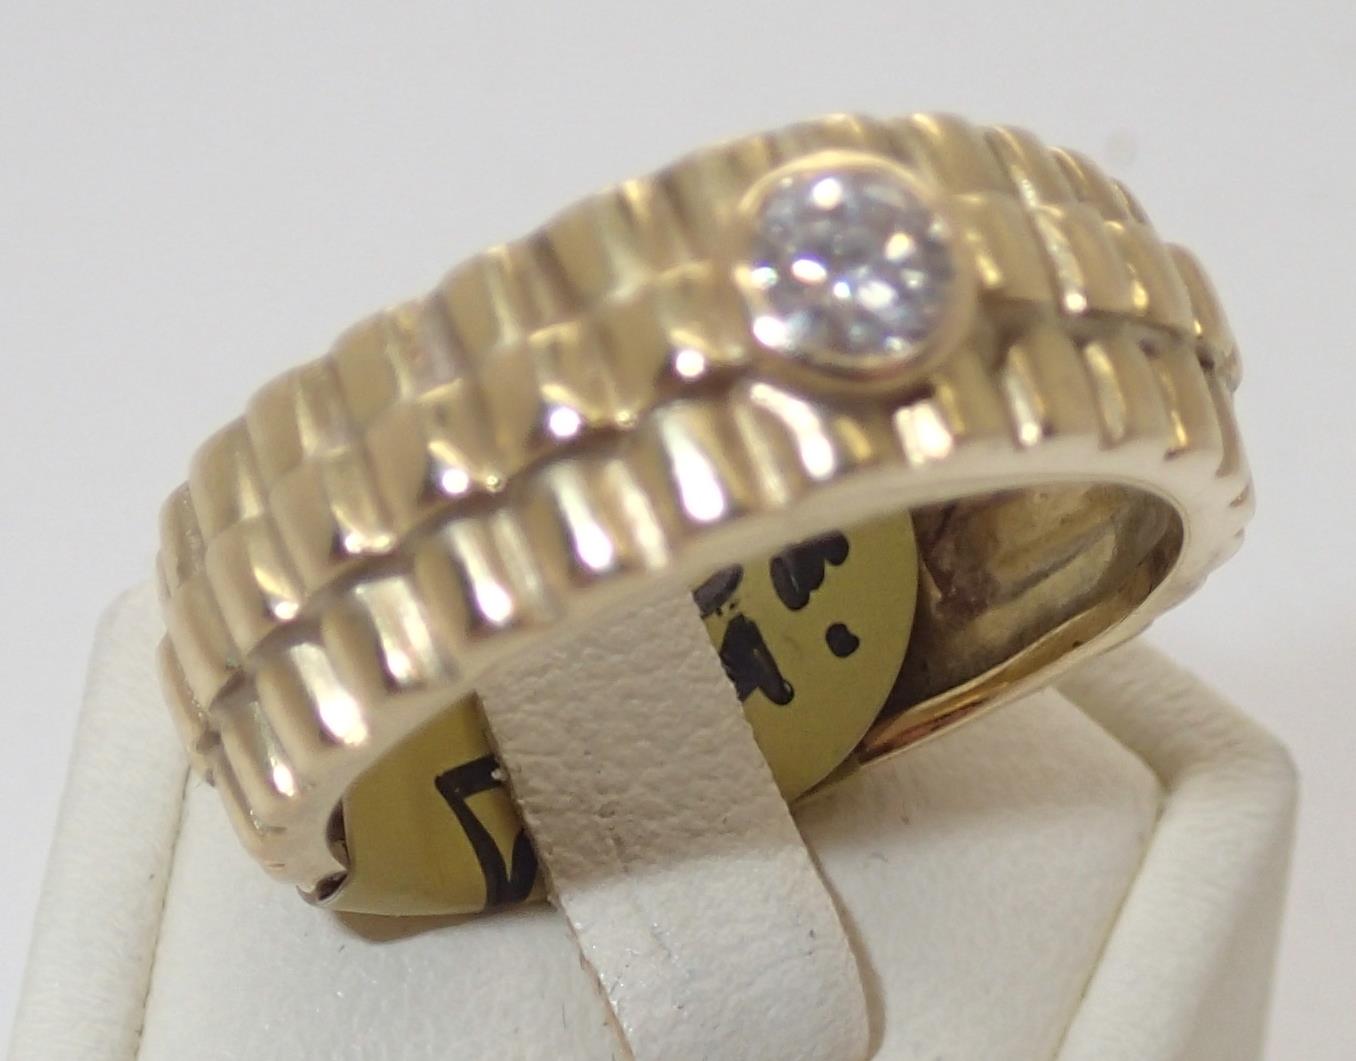 Gents 18ct Rolex style diamond ring, size V, 10.5g P&P group 1 (£16 for the first item and £1.50 for